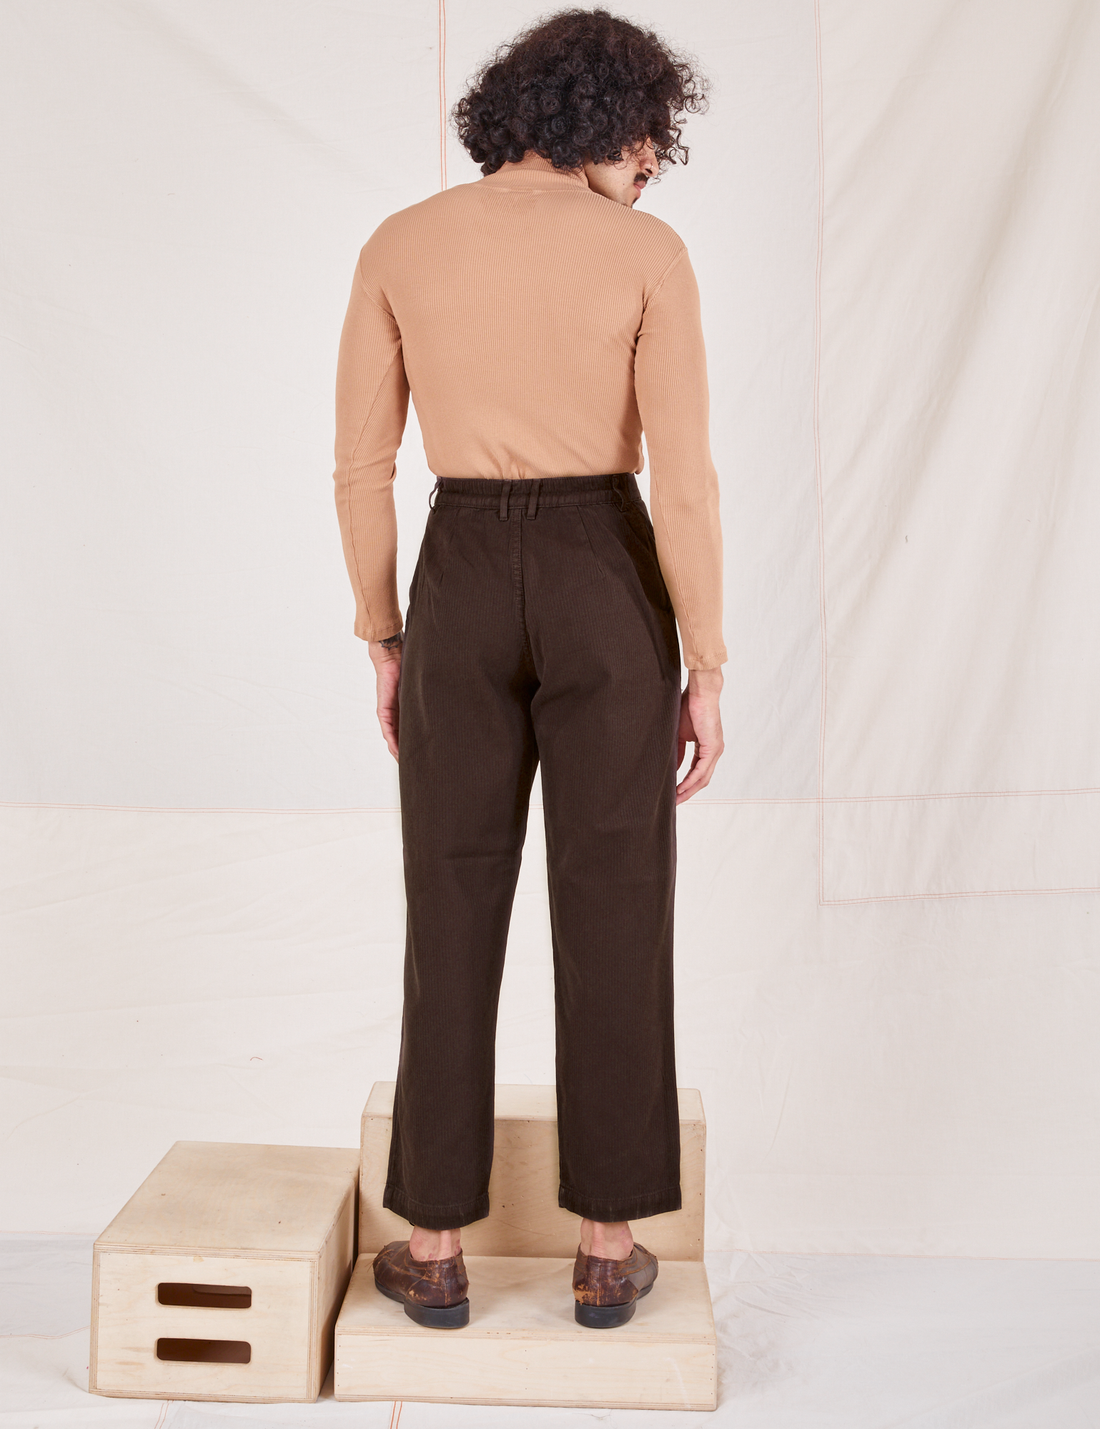 Back view of Heritage Trousers in Espresso Brown and tan Essential Turtleneck worn by Jesse